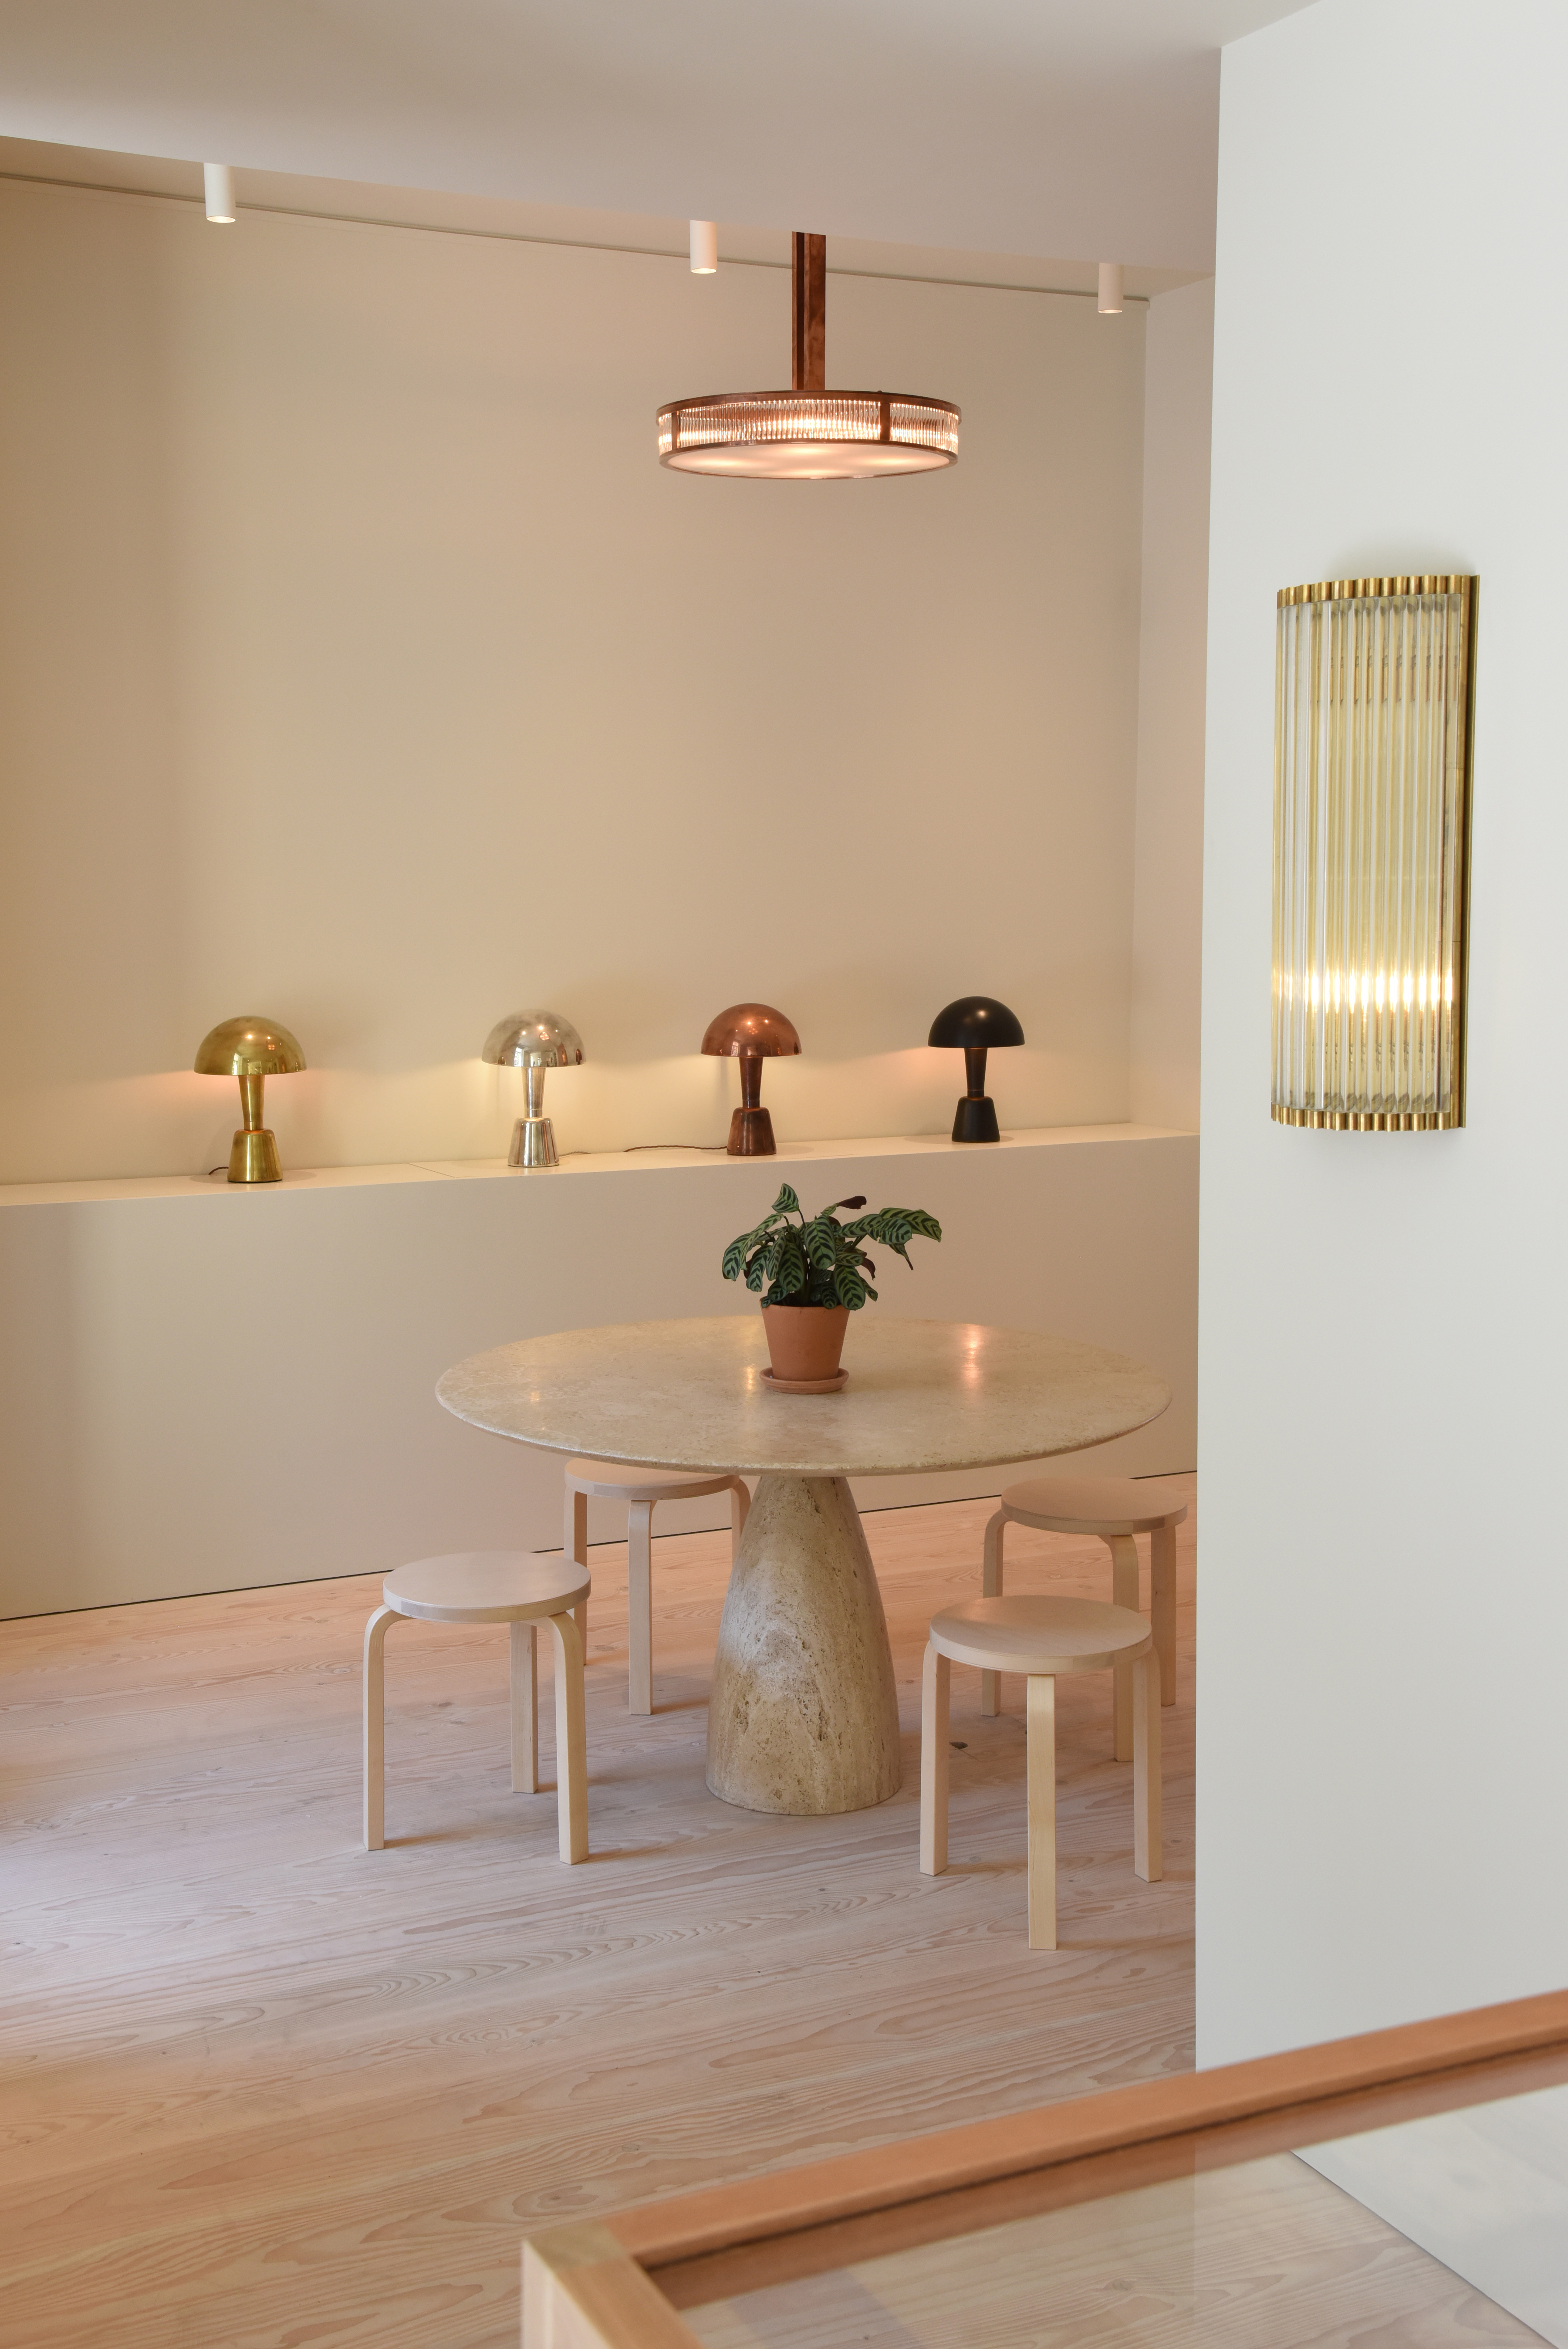 Cep lights at Collier Webb's Pimlico Road Showroom